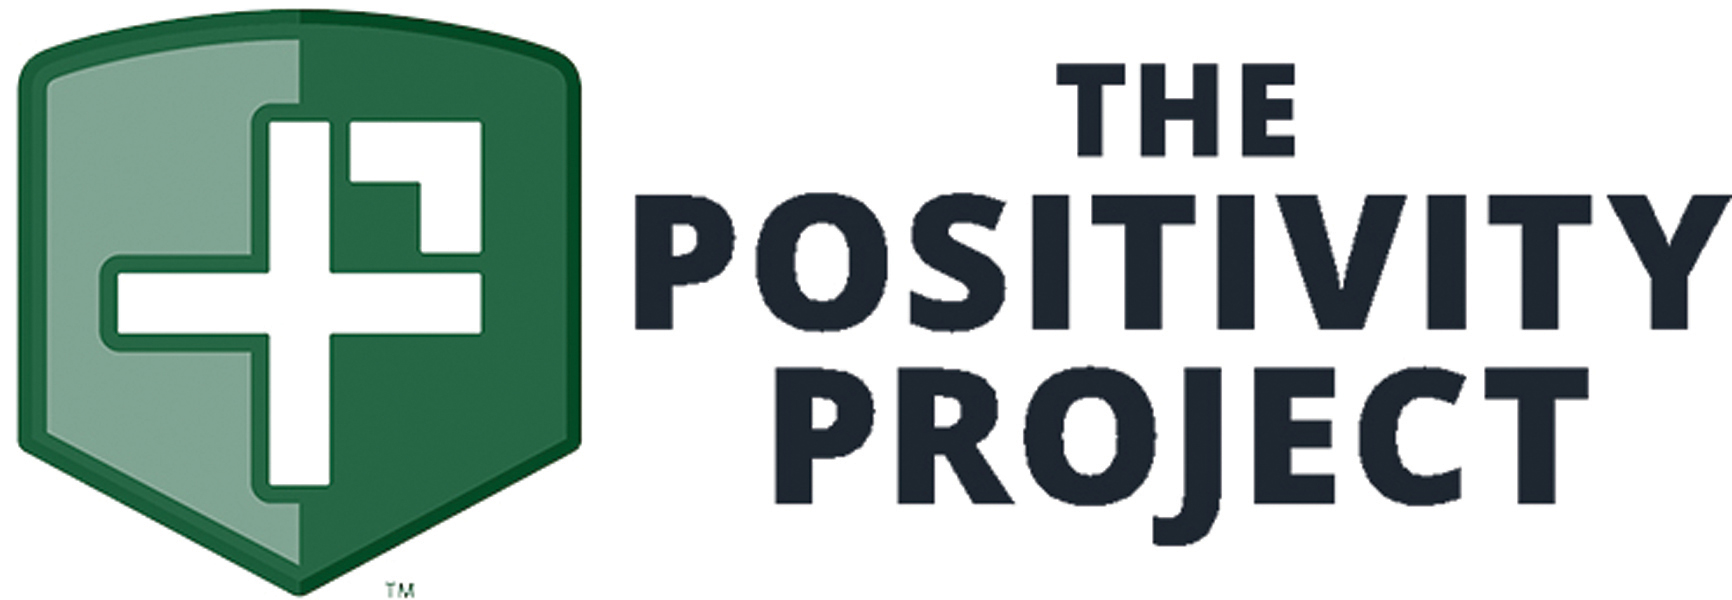 The Positivity Project link